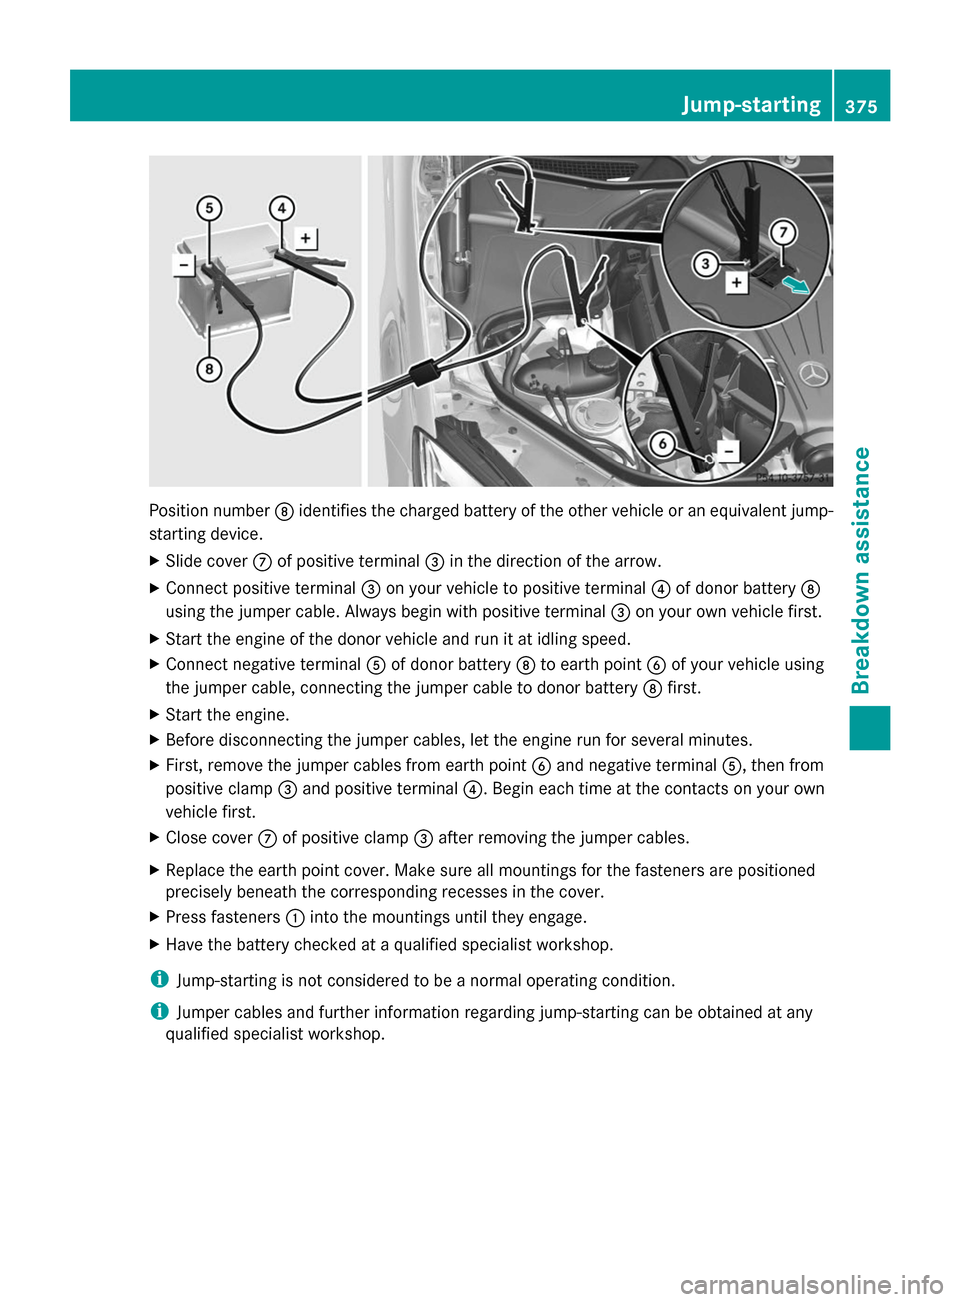 MERCEDES-BENZ S-Class 2014 W222 Service Manual Position number
006Cidentifies the charged battery of the other vehicle or an equivalent jump-
starting device.
X Slide cover 006Bof positive terminal 0087in the direction of the arrow.
X Connect posi